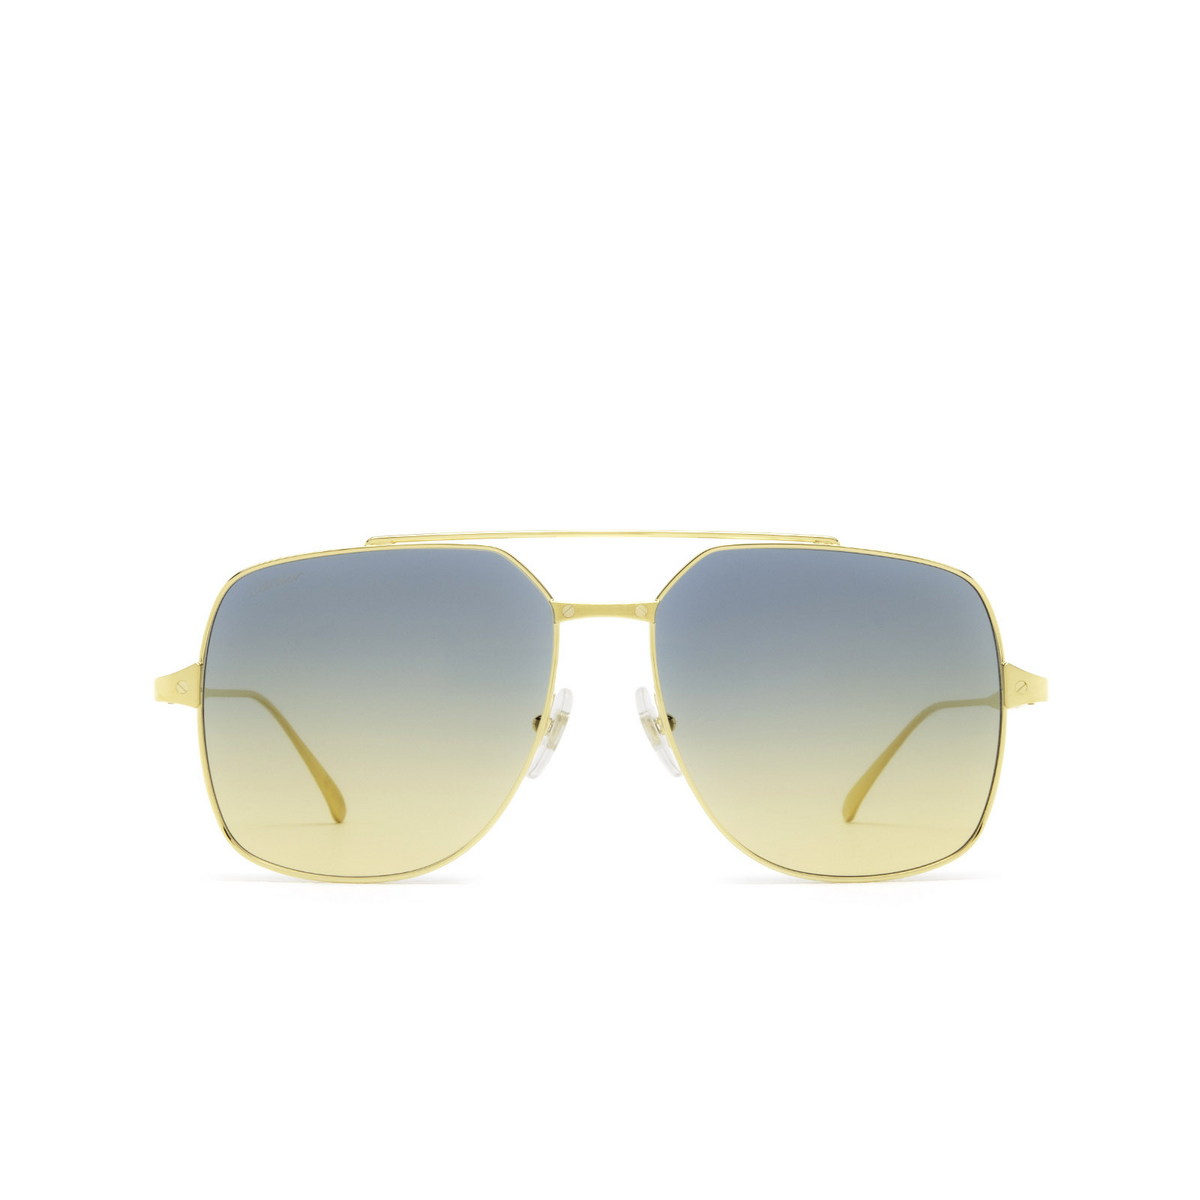 Cartier® Square Sunglasses: CT0329S color Gold 003 - front view.